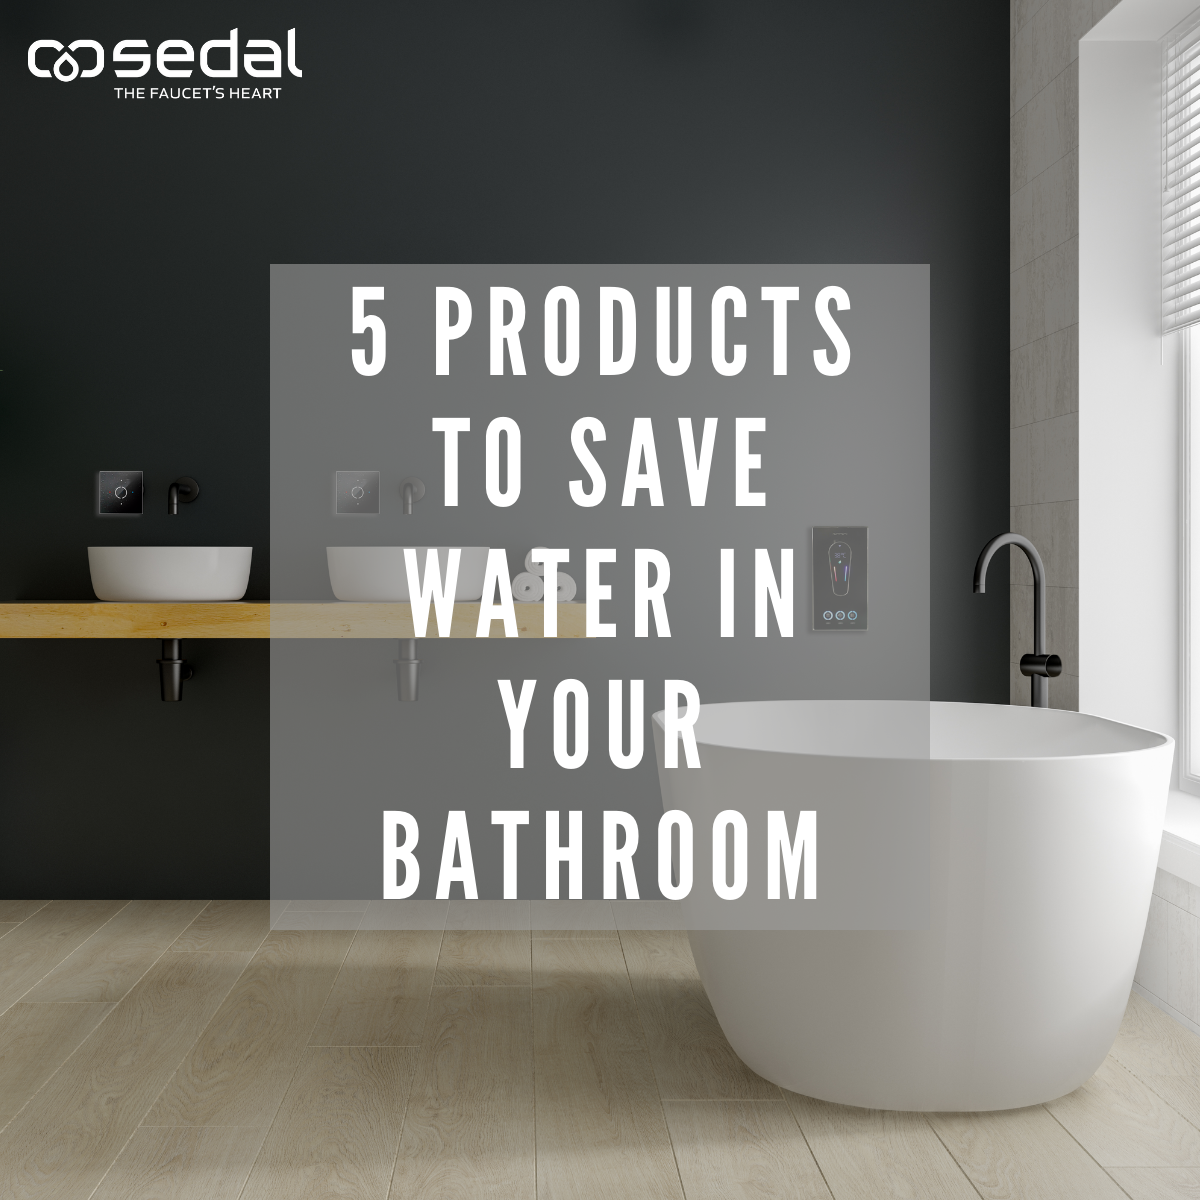 5 products to save water in your bathroom